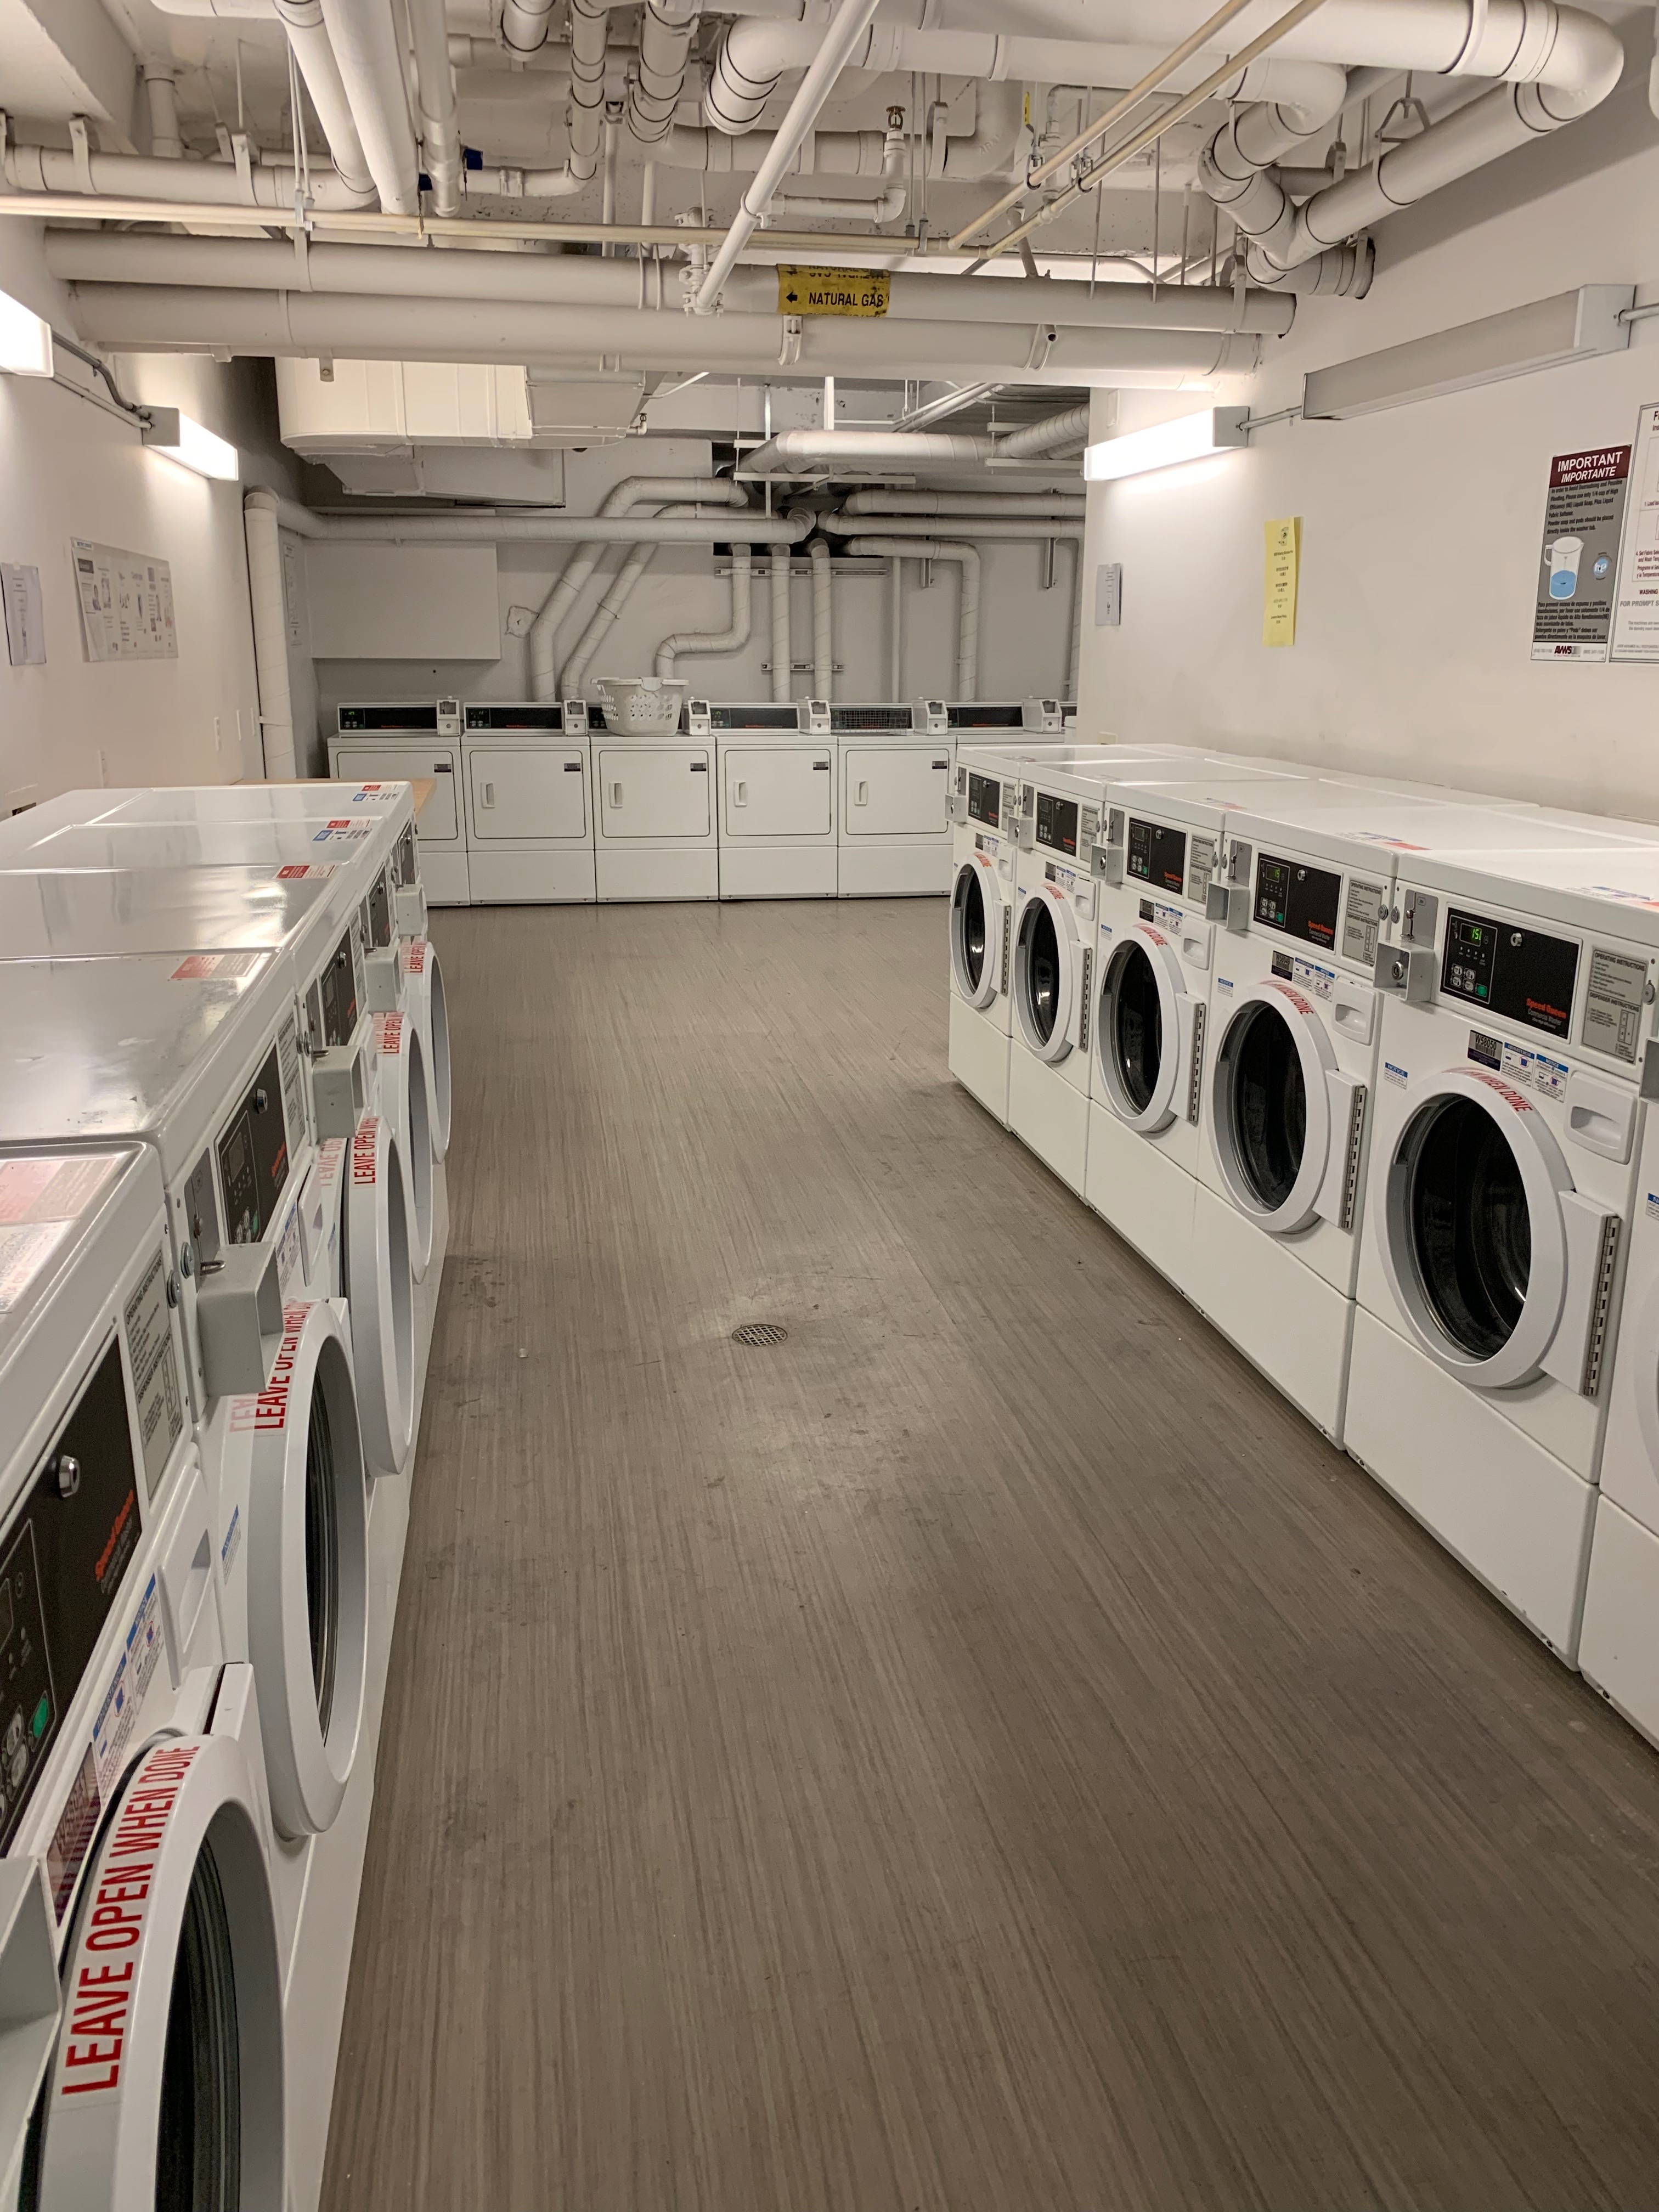 Laundry room with several washer and dryer appliances set up in an L shaped passageway.